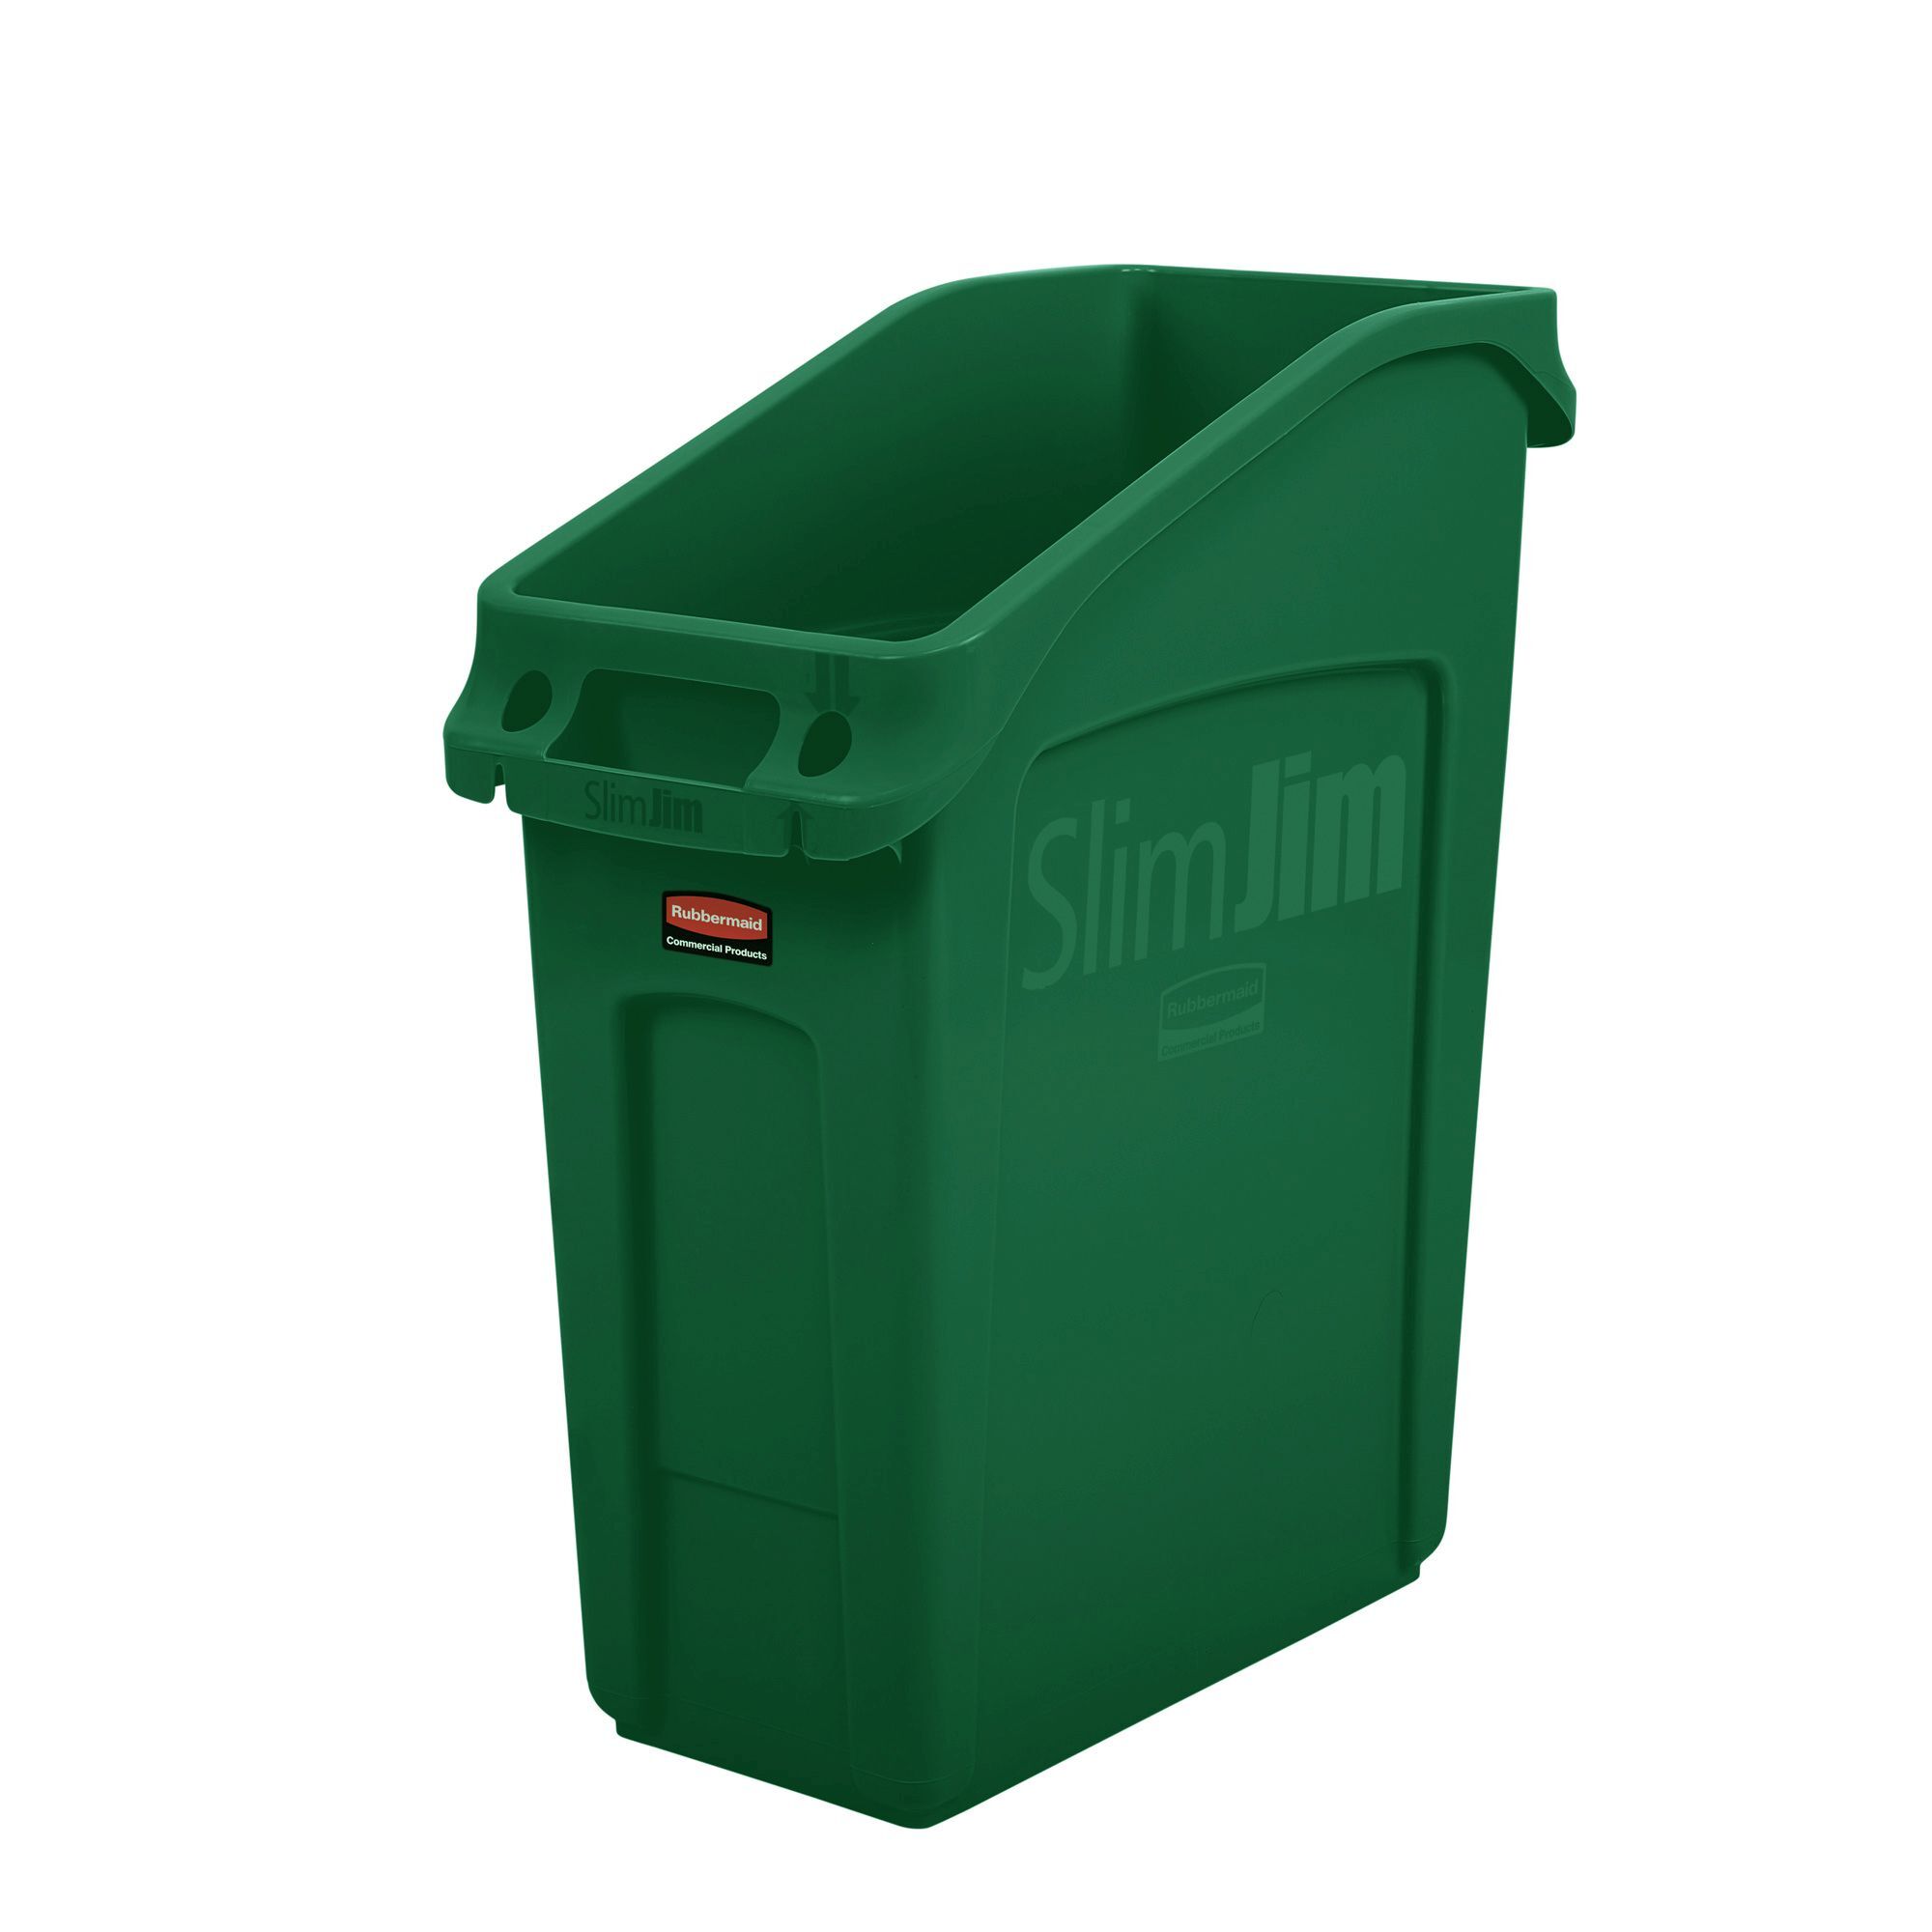 Rubbermaid Slim Jim Under-Counter container 49 ltr, Rubbermaid, model: VB 237689, groen